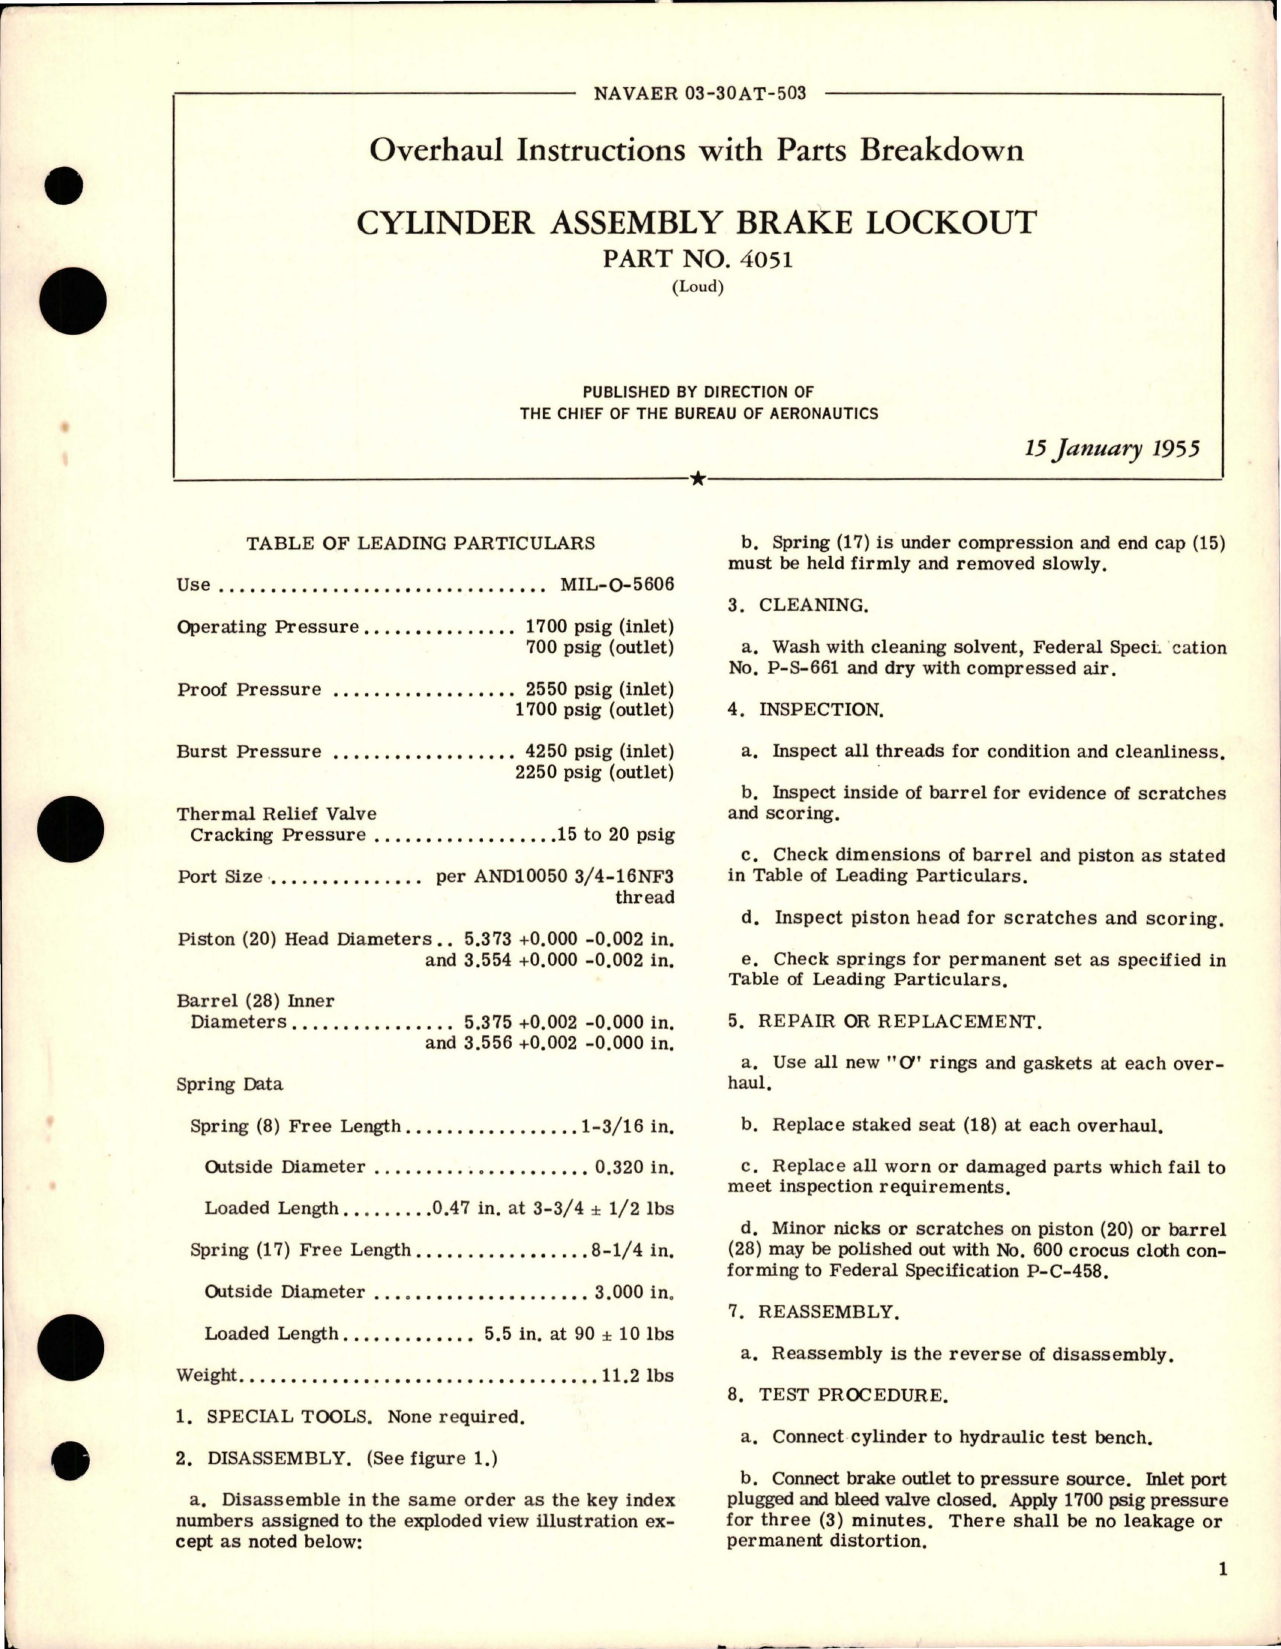 Sample page 1 from AirCorps Library document: Overhaul Instructions with Parts Breakdown for Cylinder Assembly Brake Lockout - Part 4051 